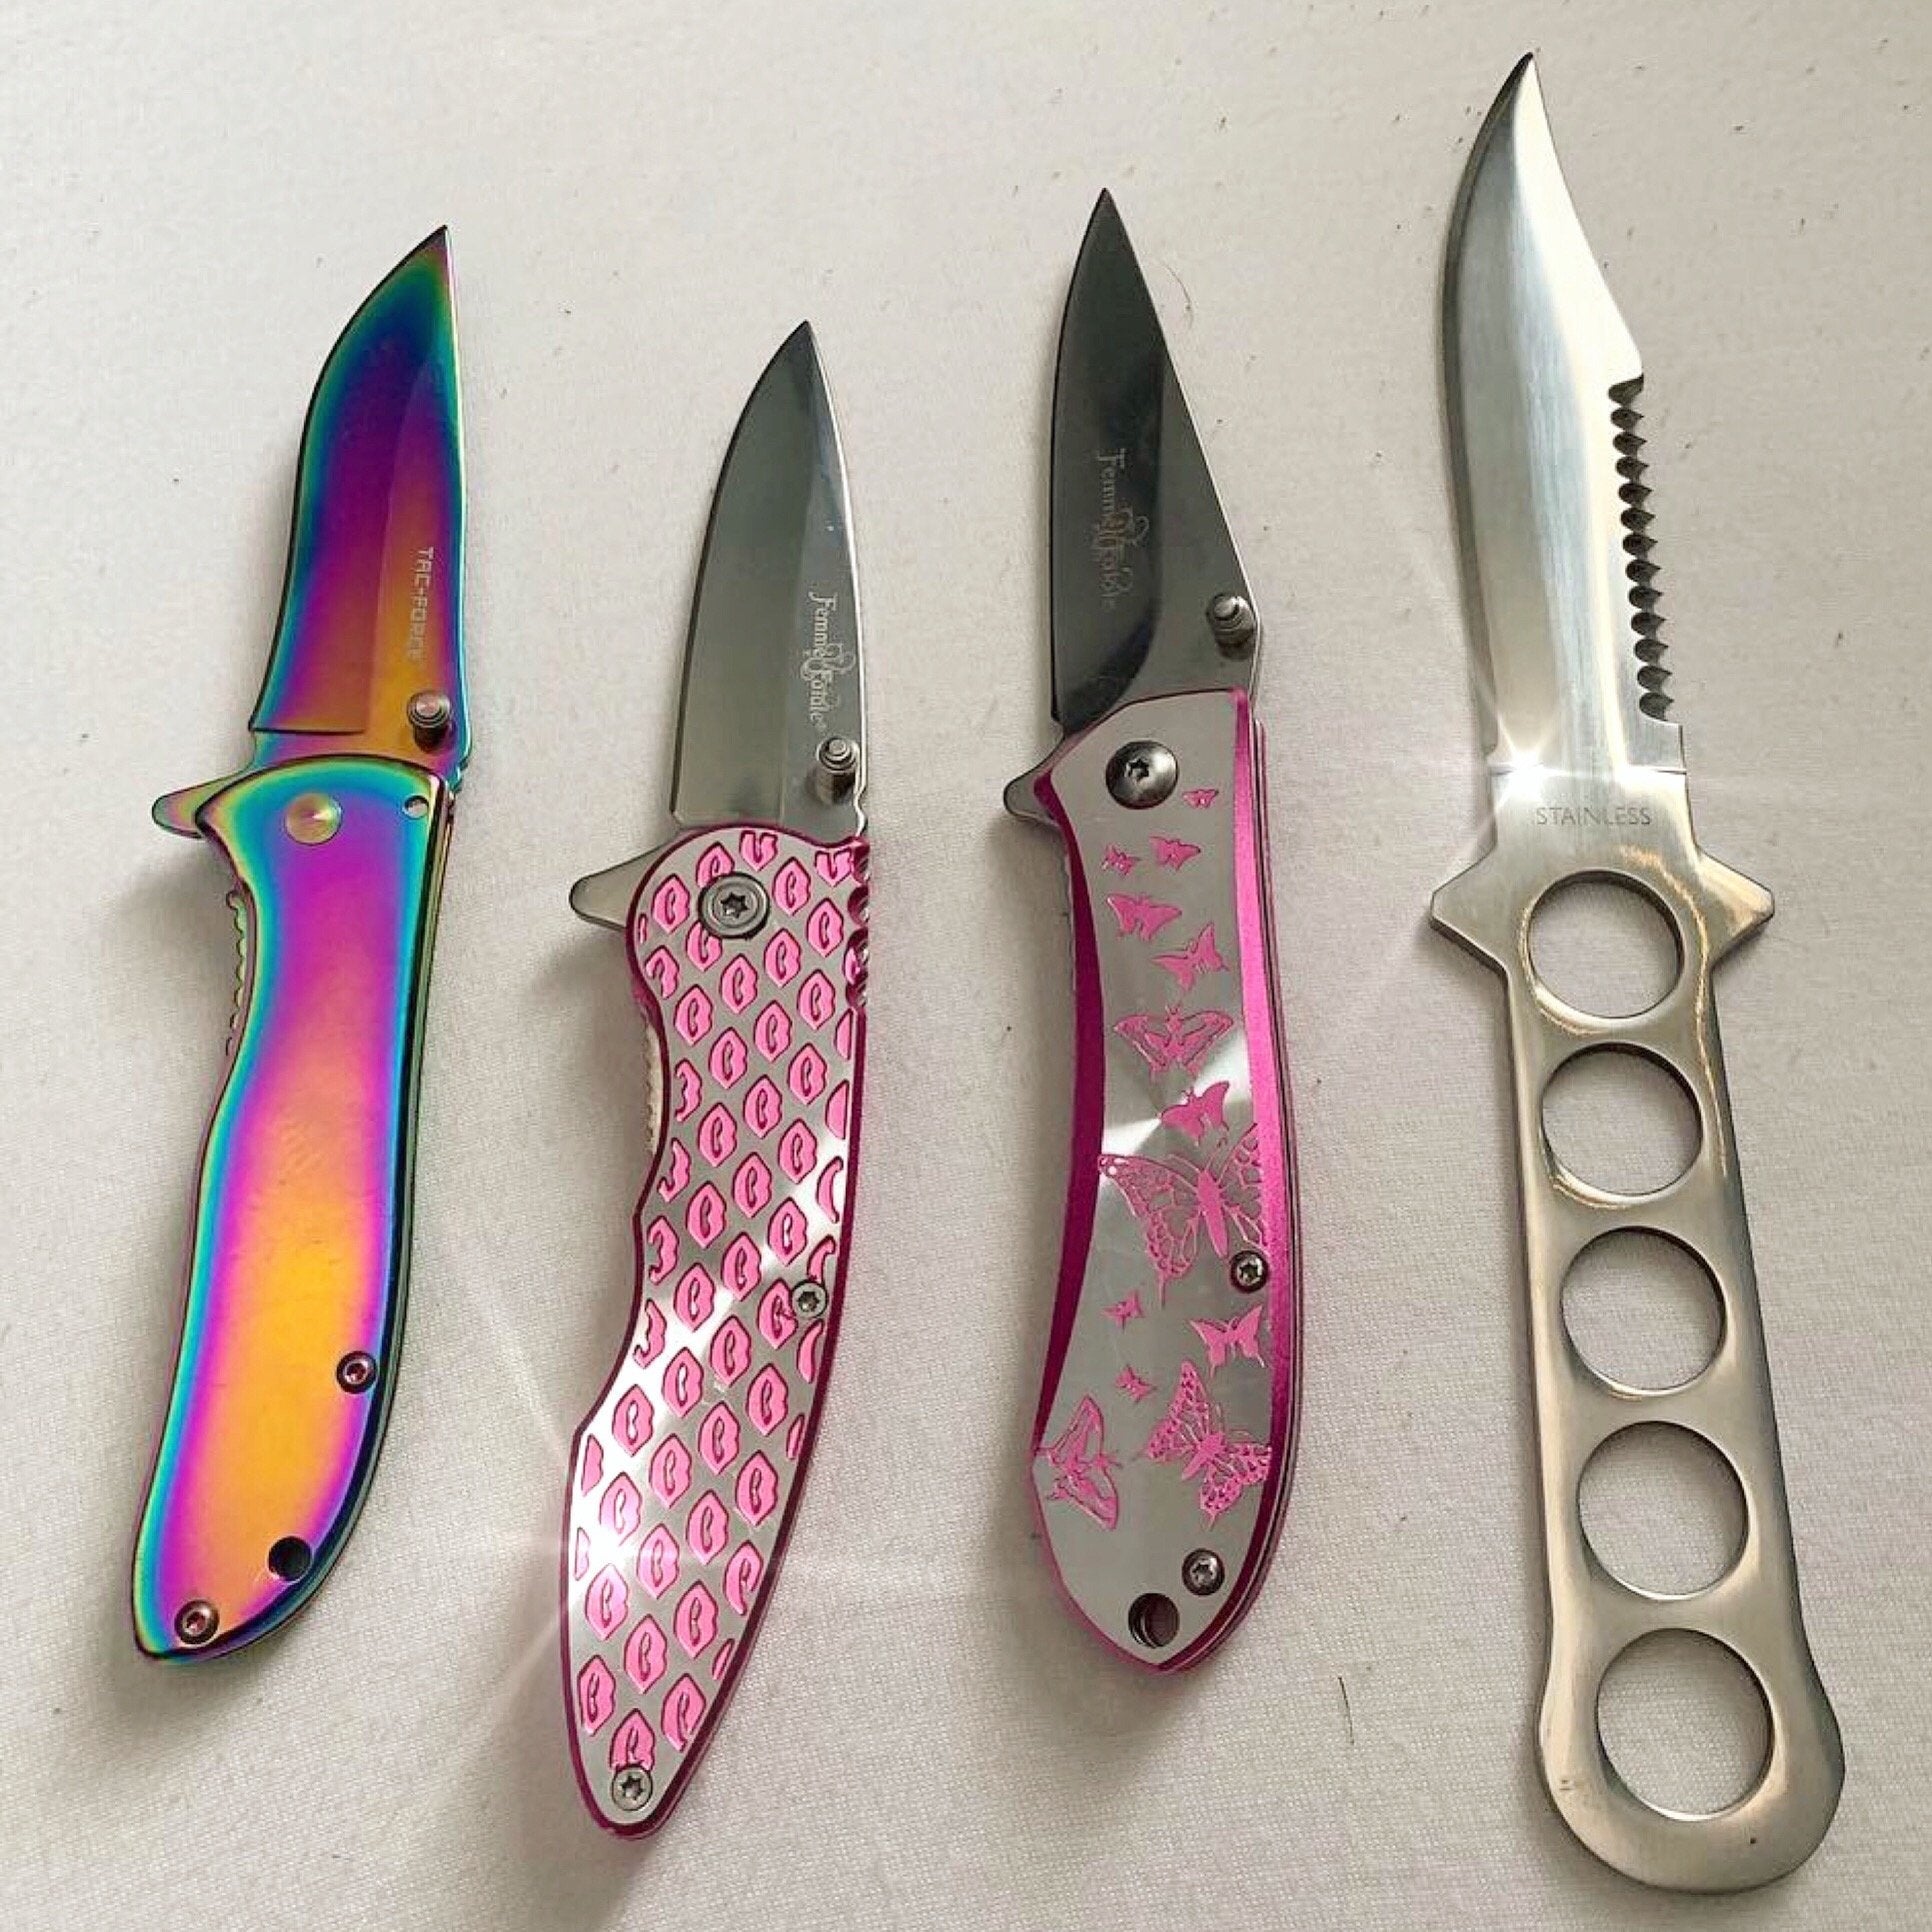 Standard Rainbow Knife - Blades For Babes Spring Assisted